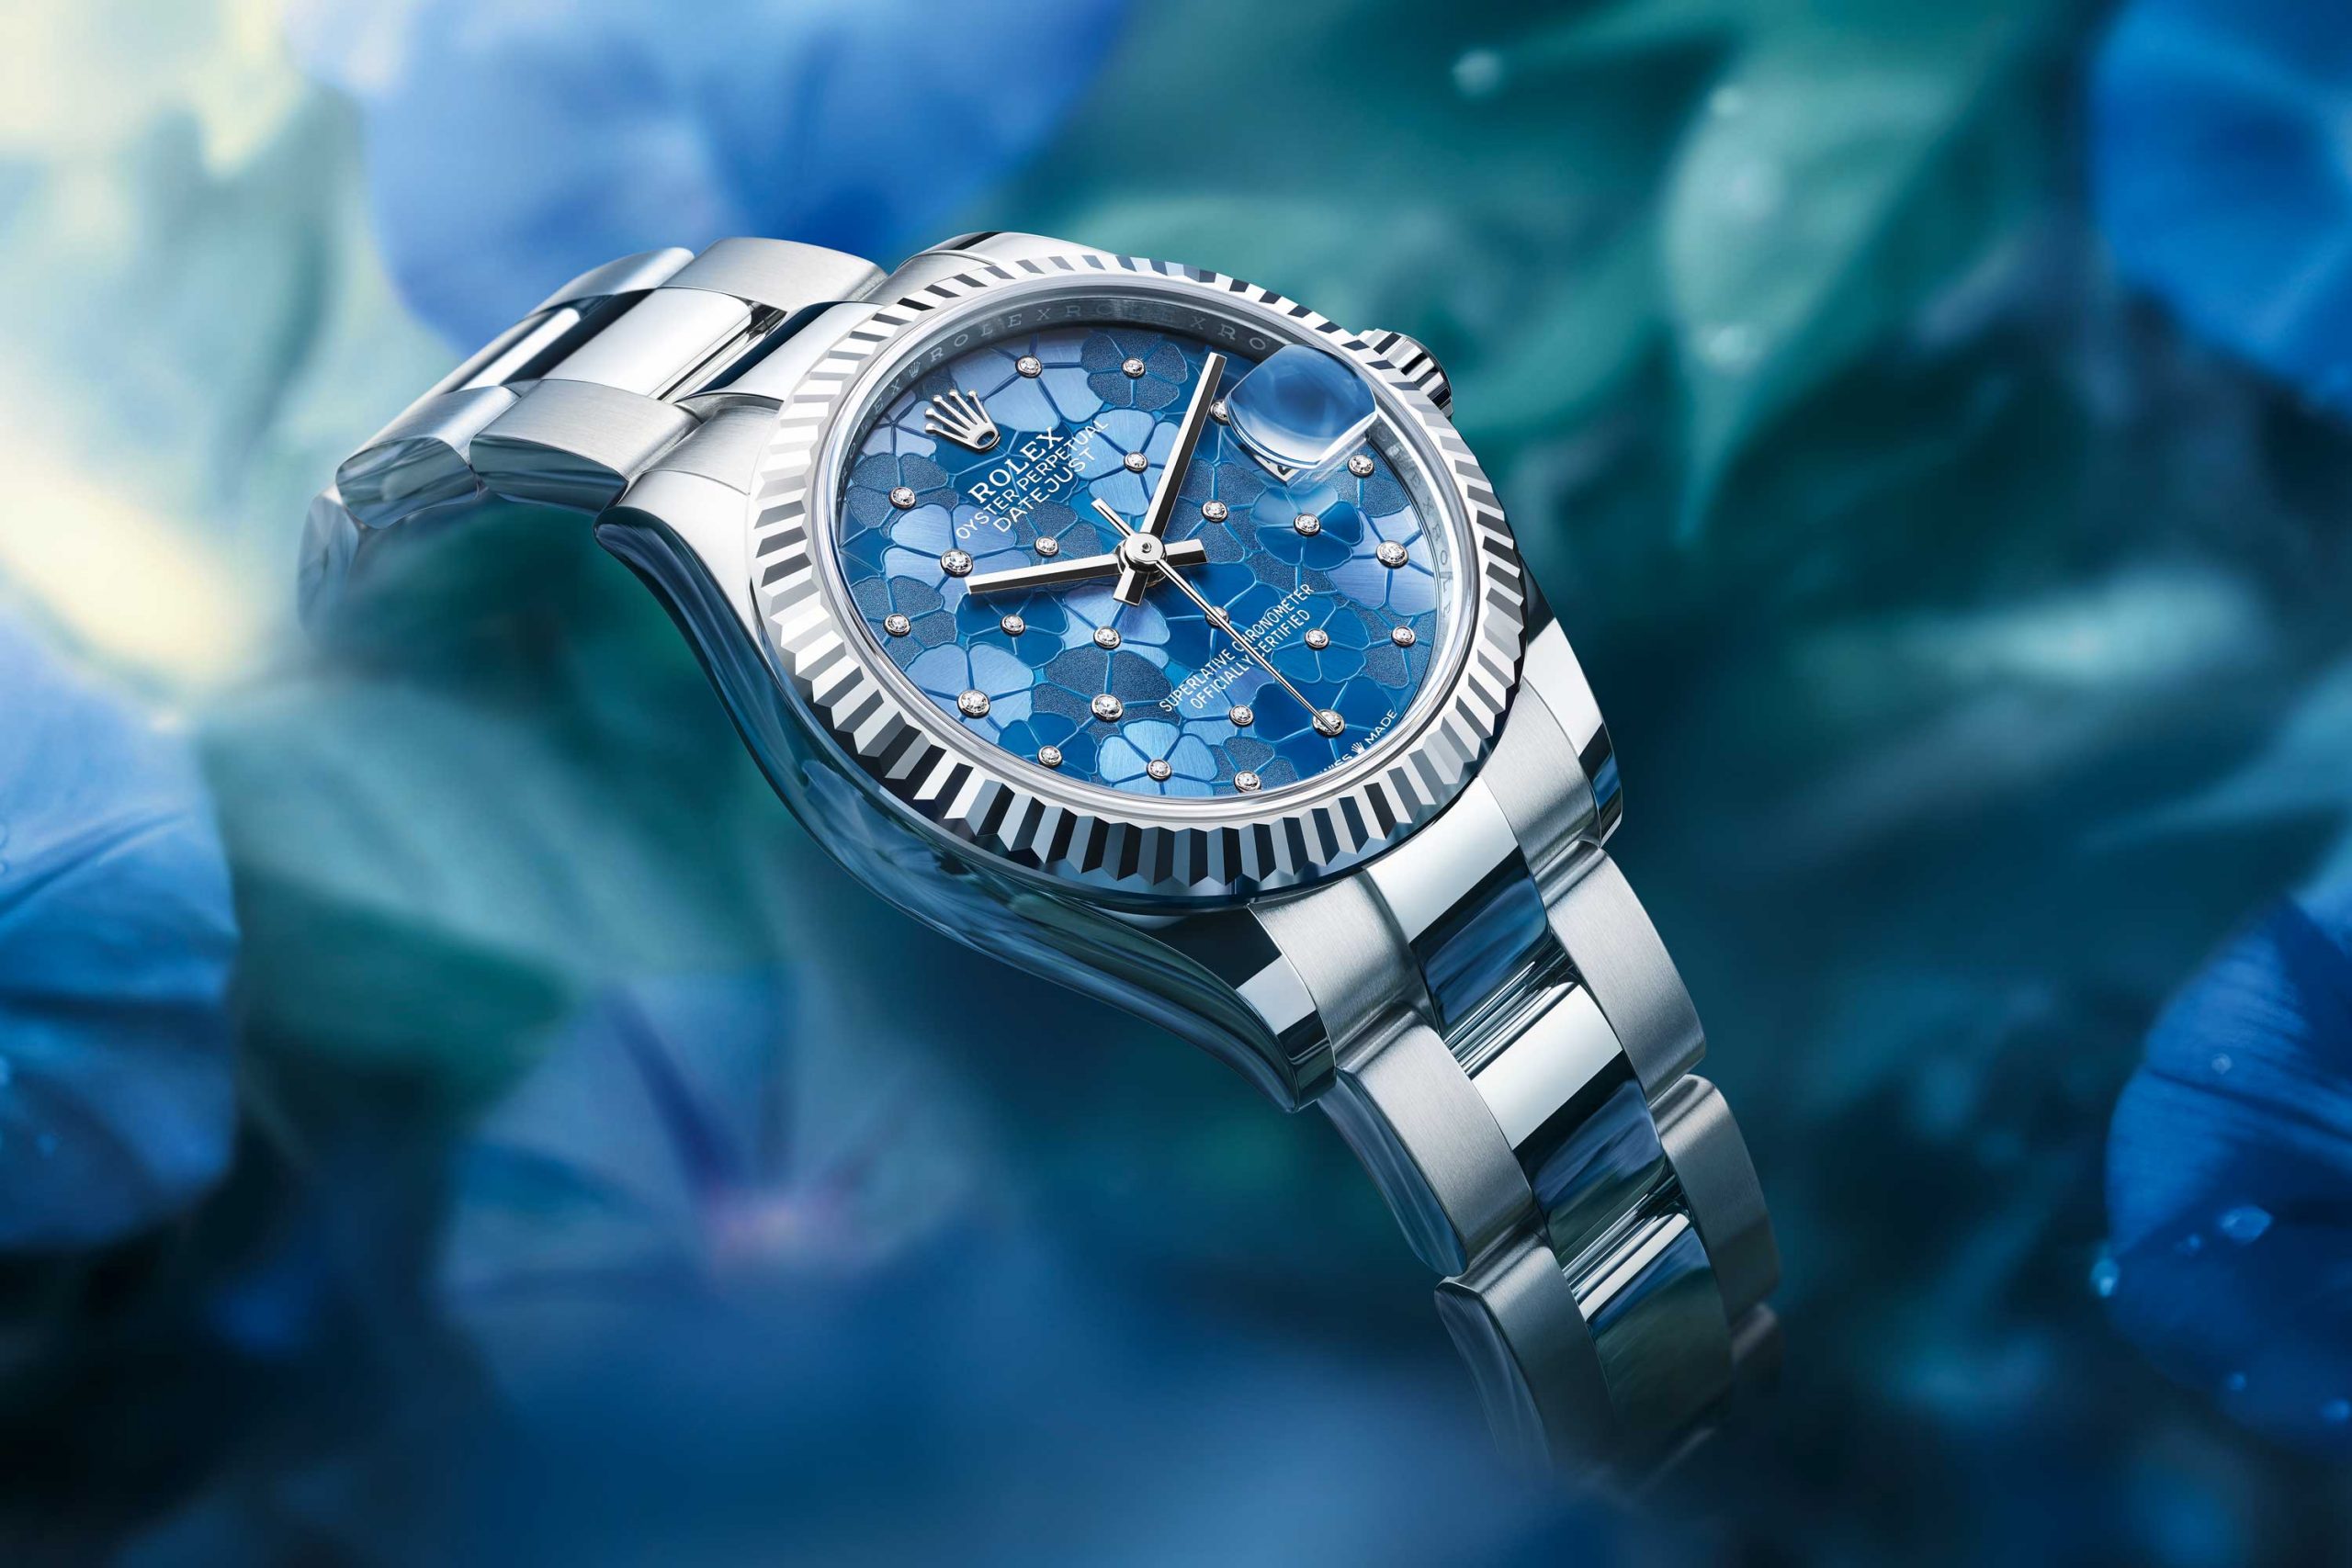 New for 2022, the 31mm Datejust has been given a floral makeover